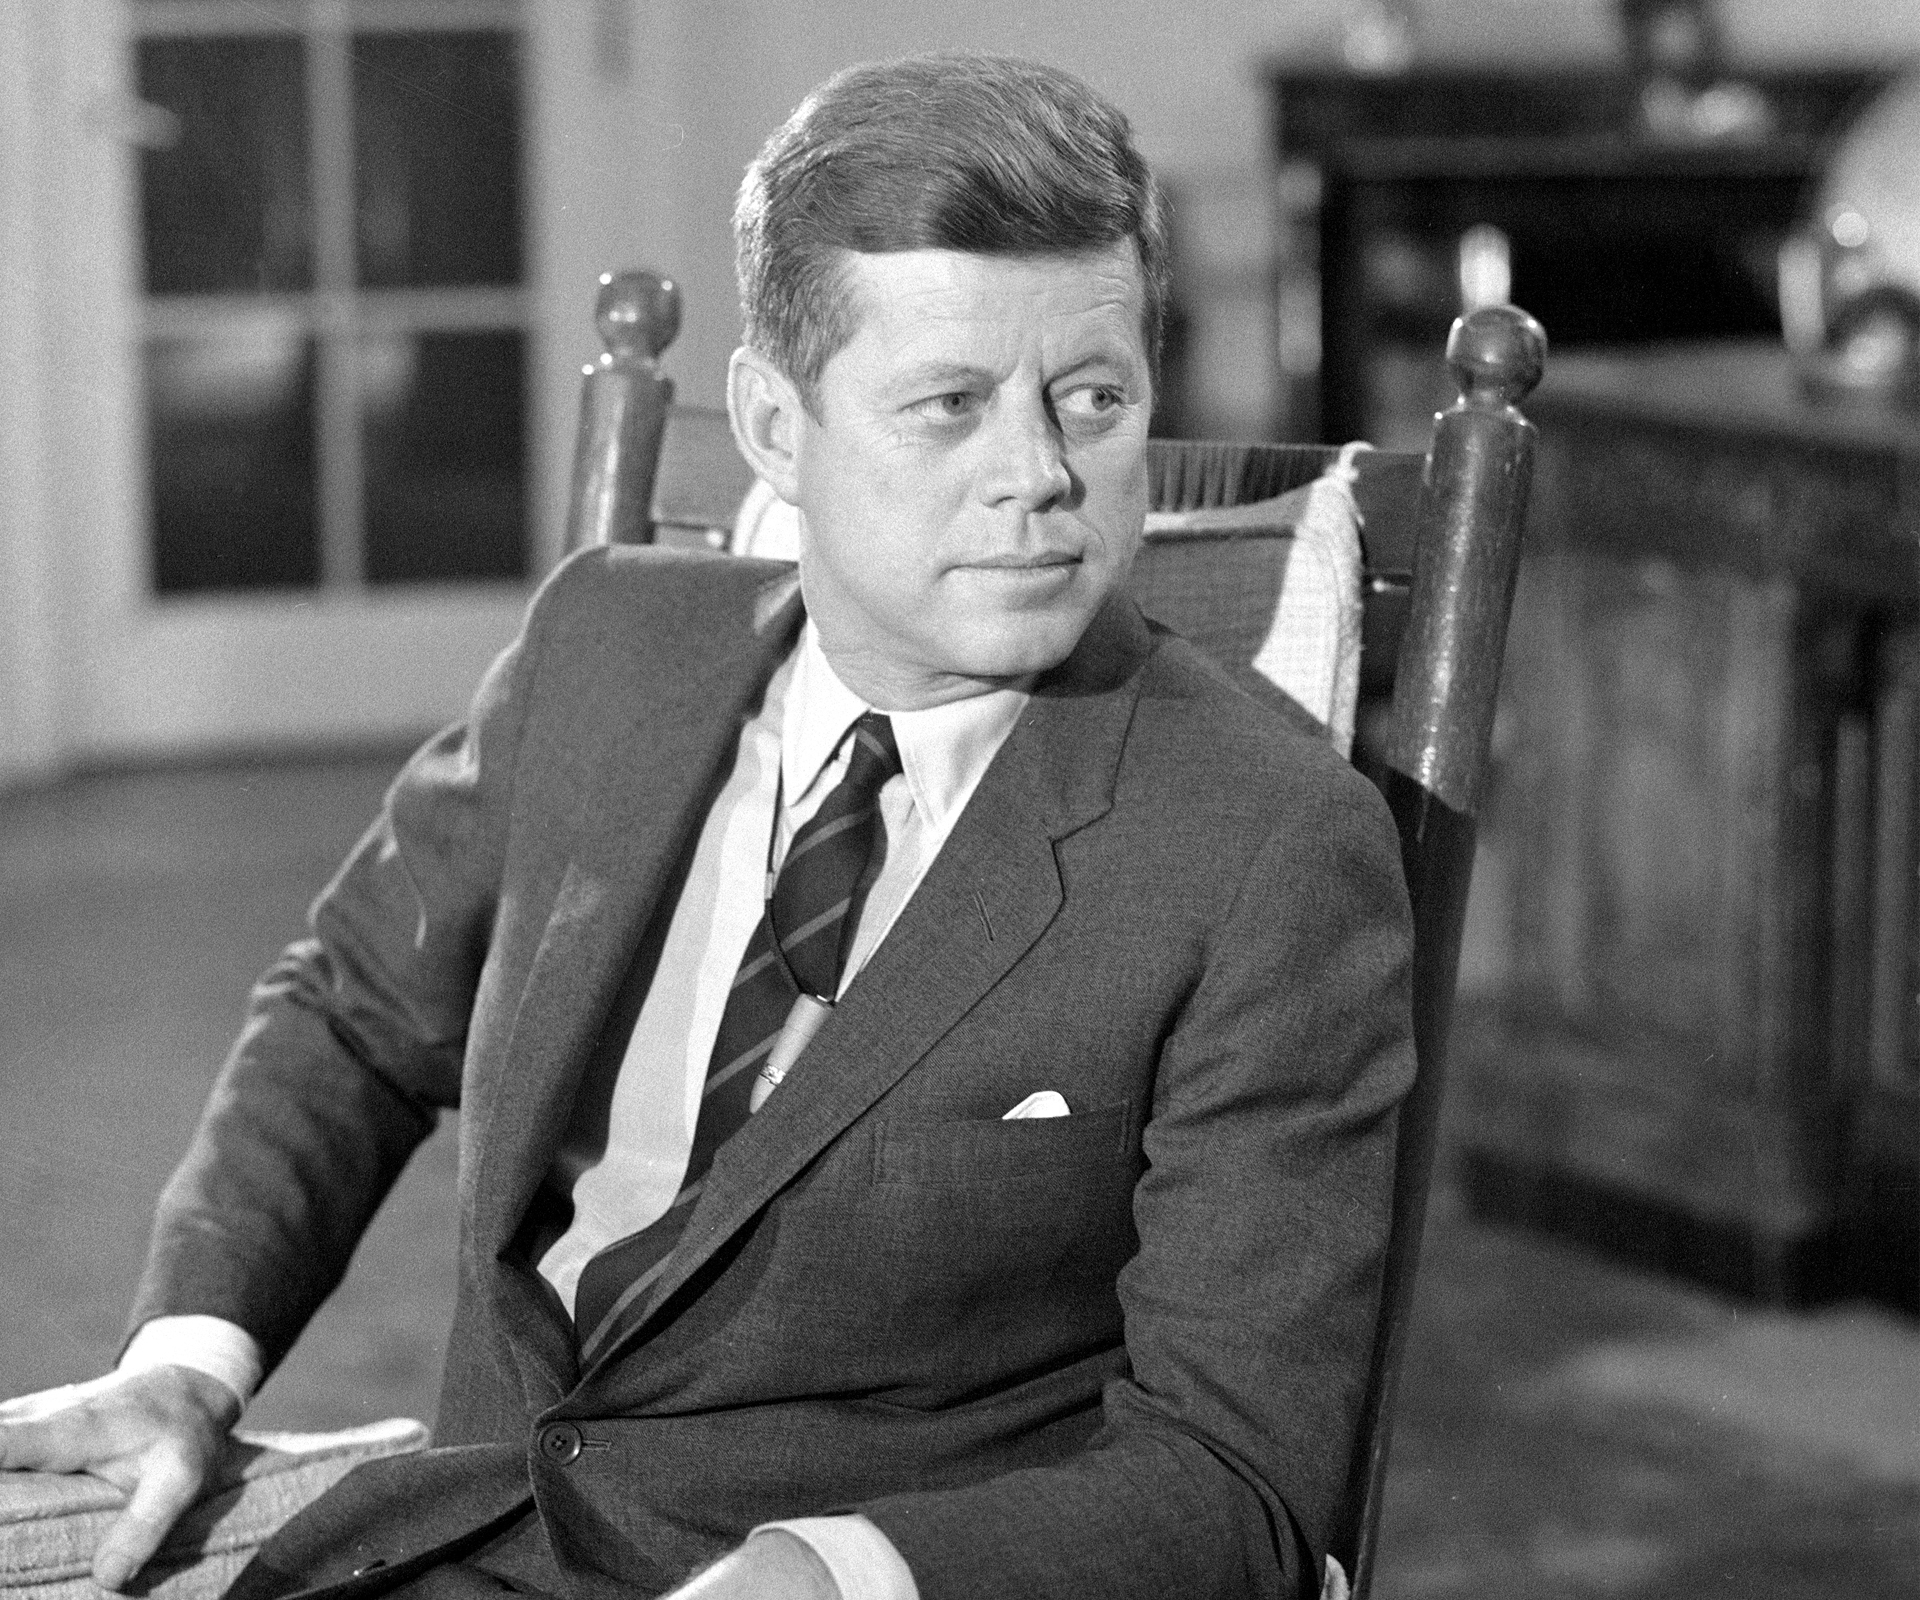 JFK’s love letters up for auction. And they weren’t for Jackie